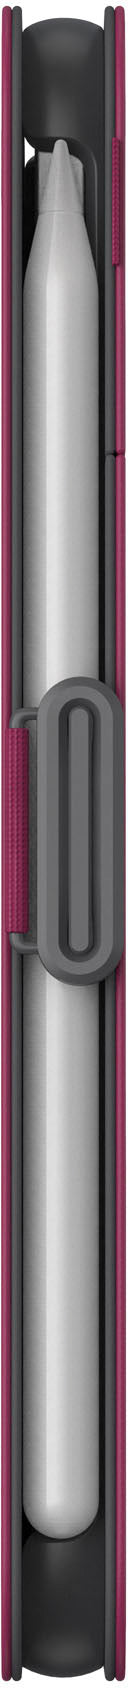 Speck - Balance Folio Case with Microban for iPad Mini 6 - Verry Berry Red / Slate Grey_1